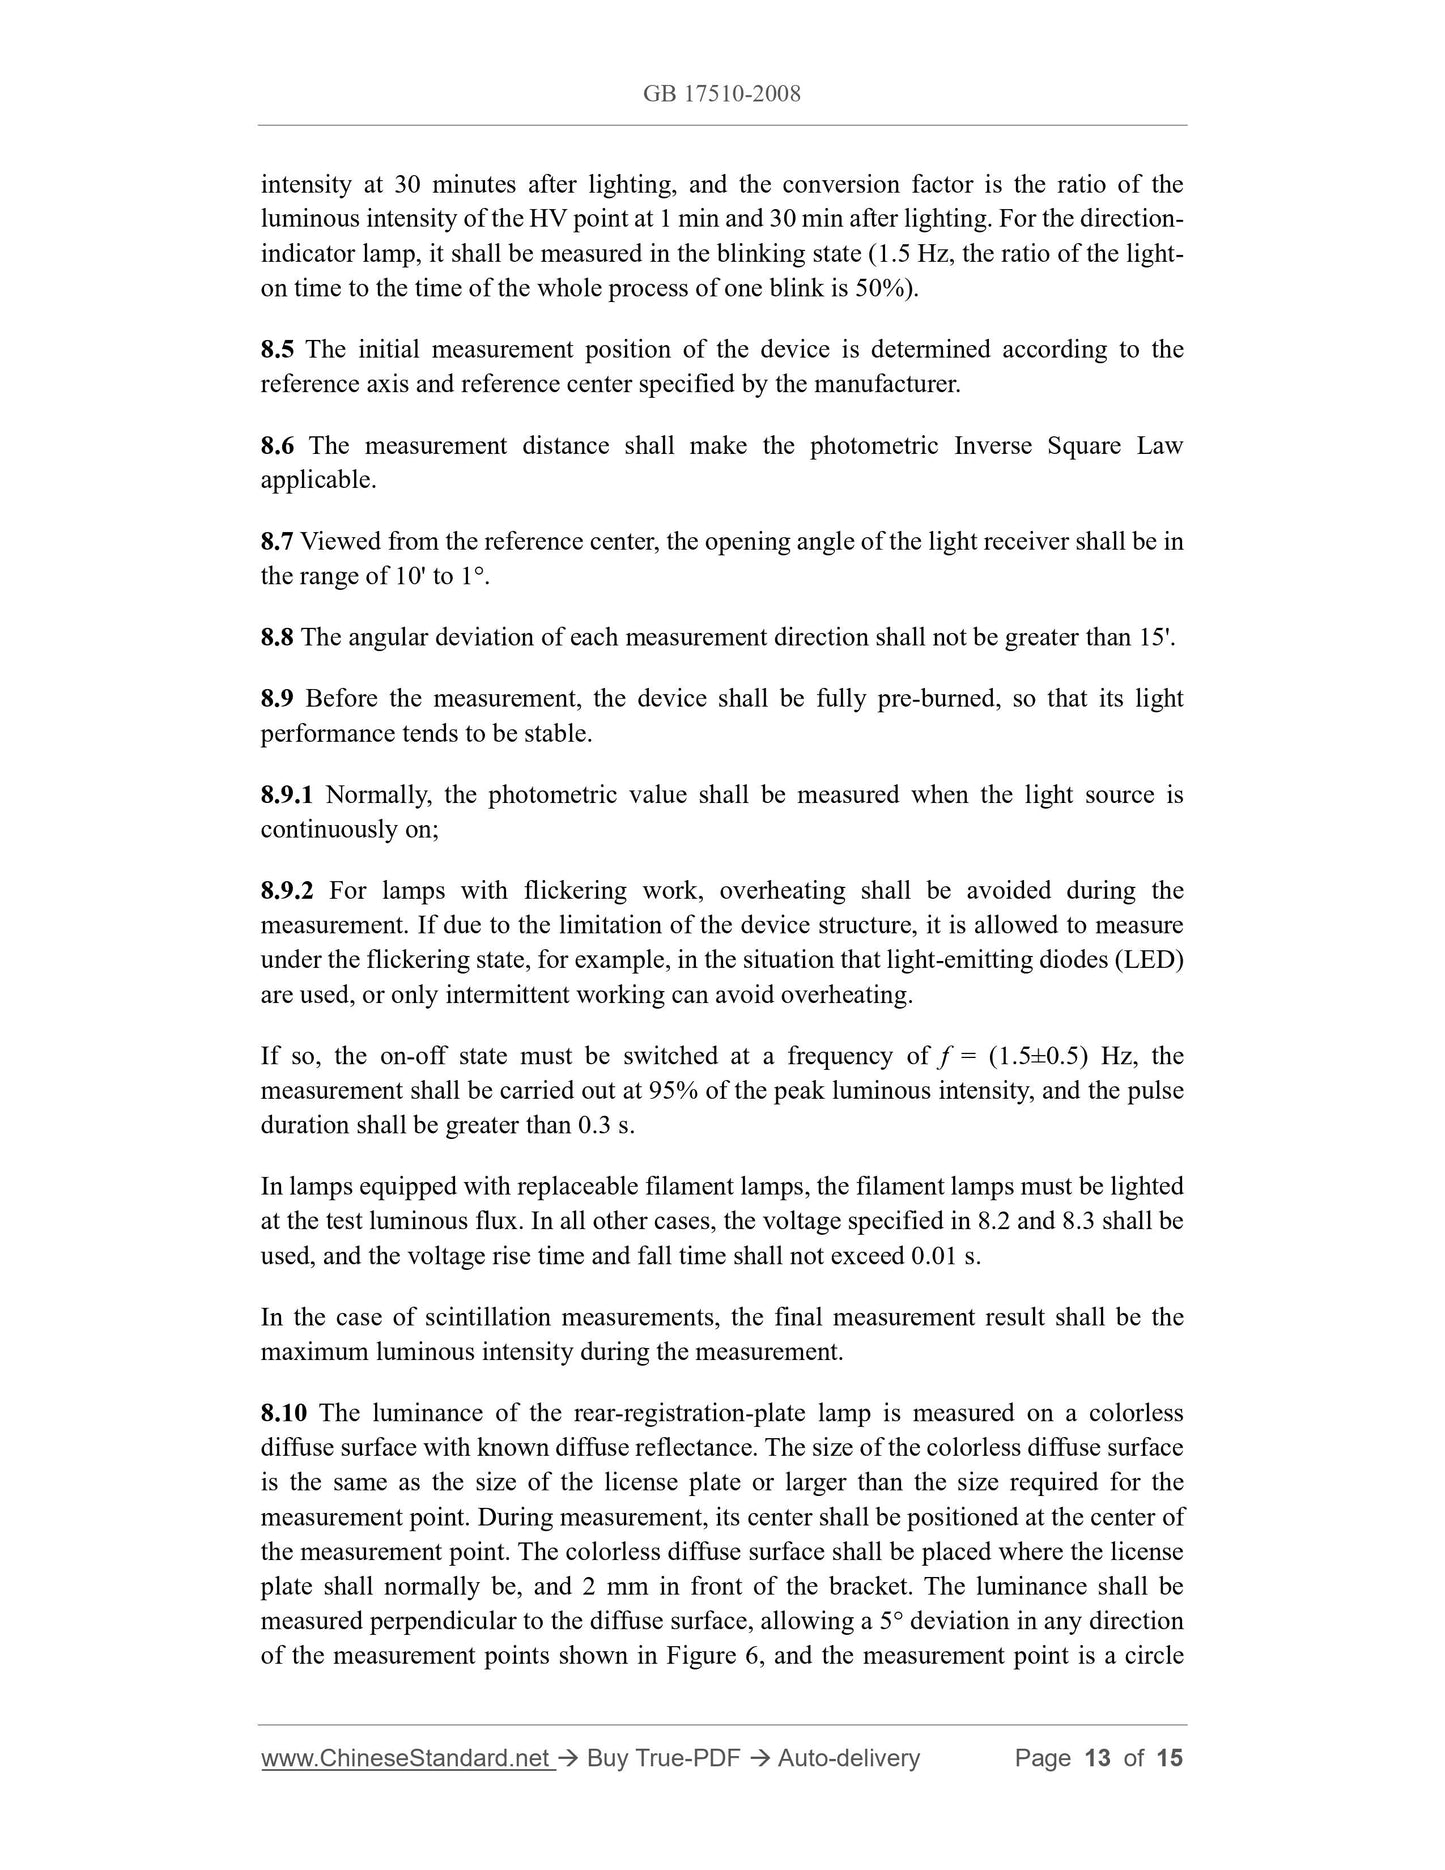 GB 17510-2008 Page 6